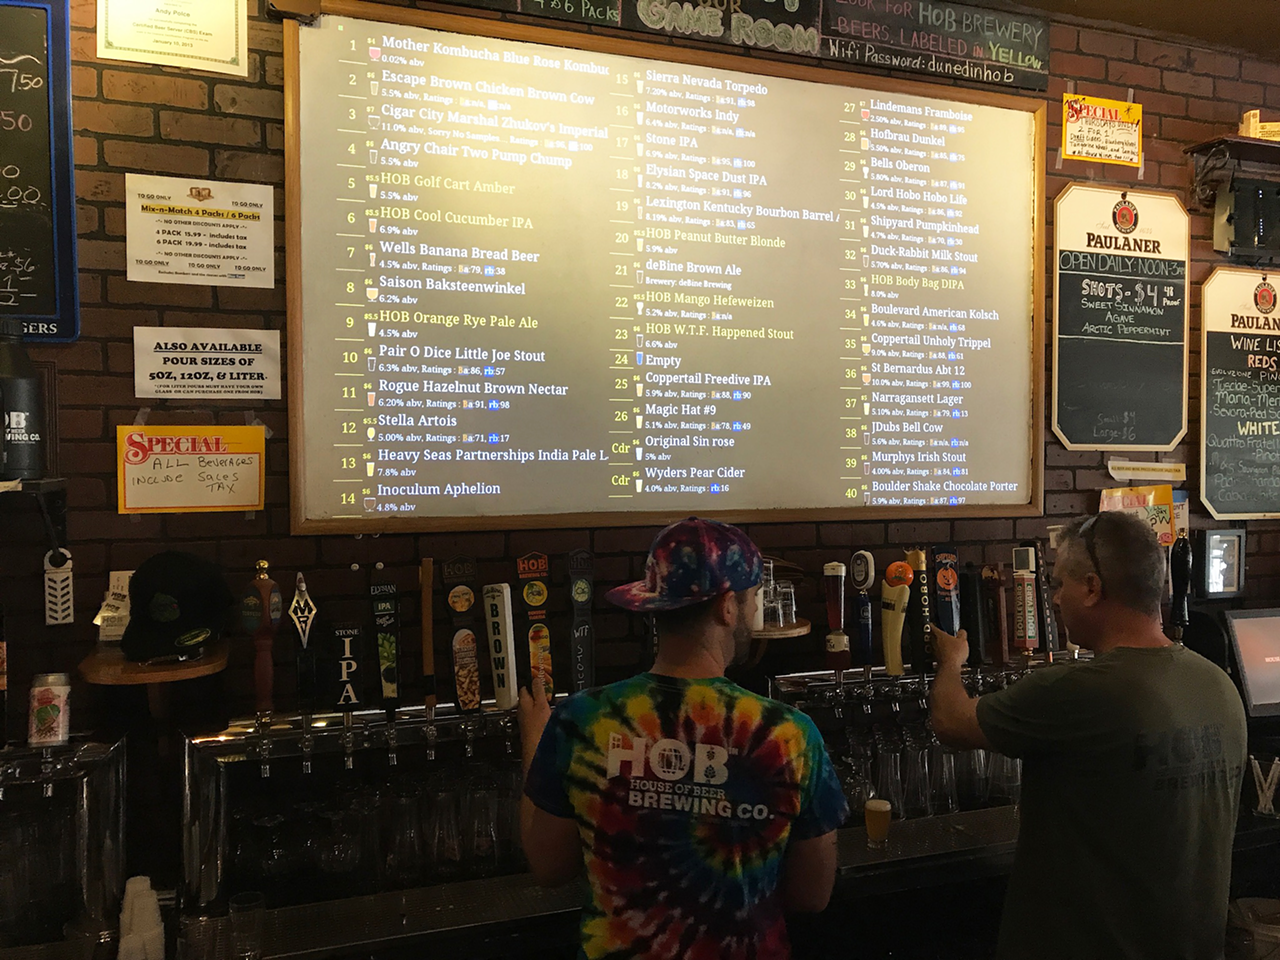 There's a generous list of brews on hand, but HOB Brewing Company's selections are too tempting to pass up.